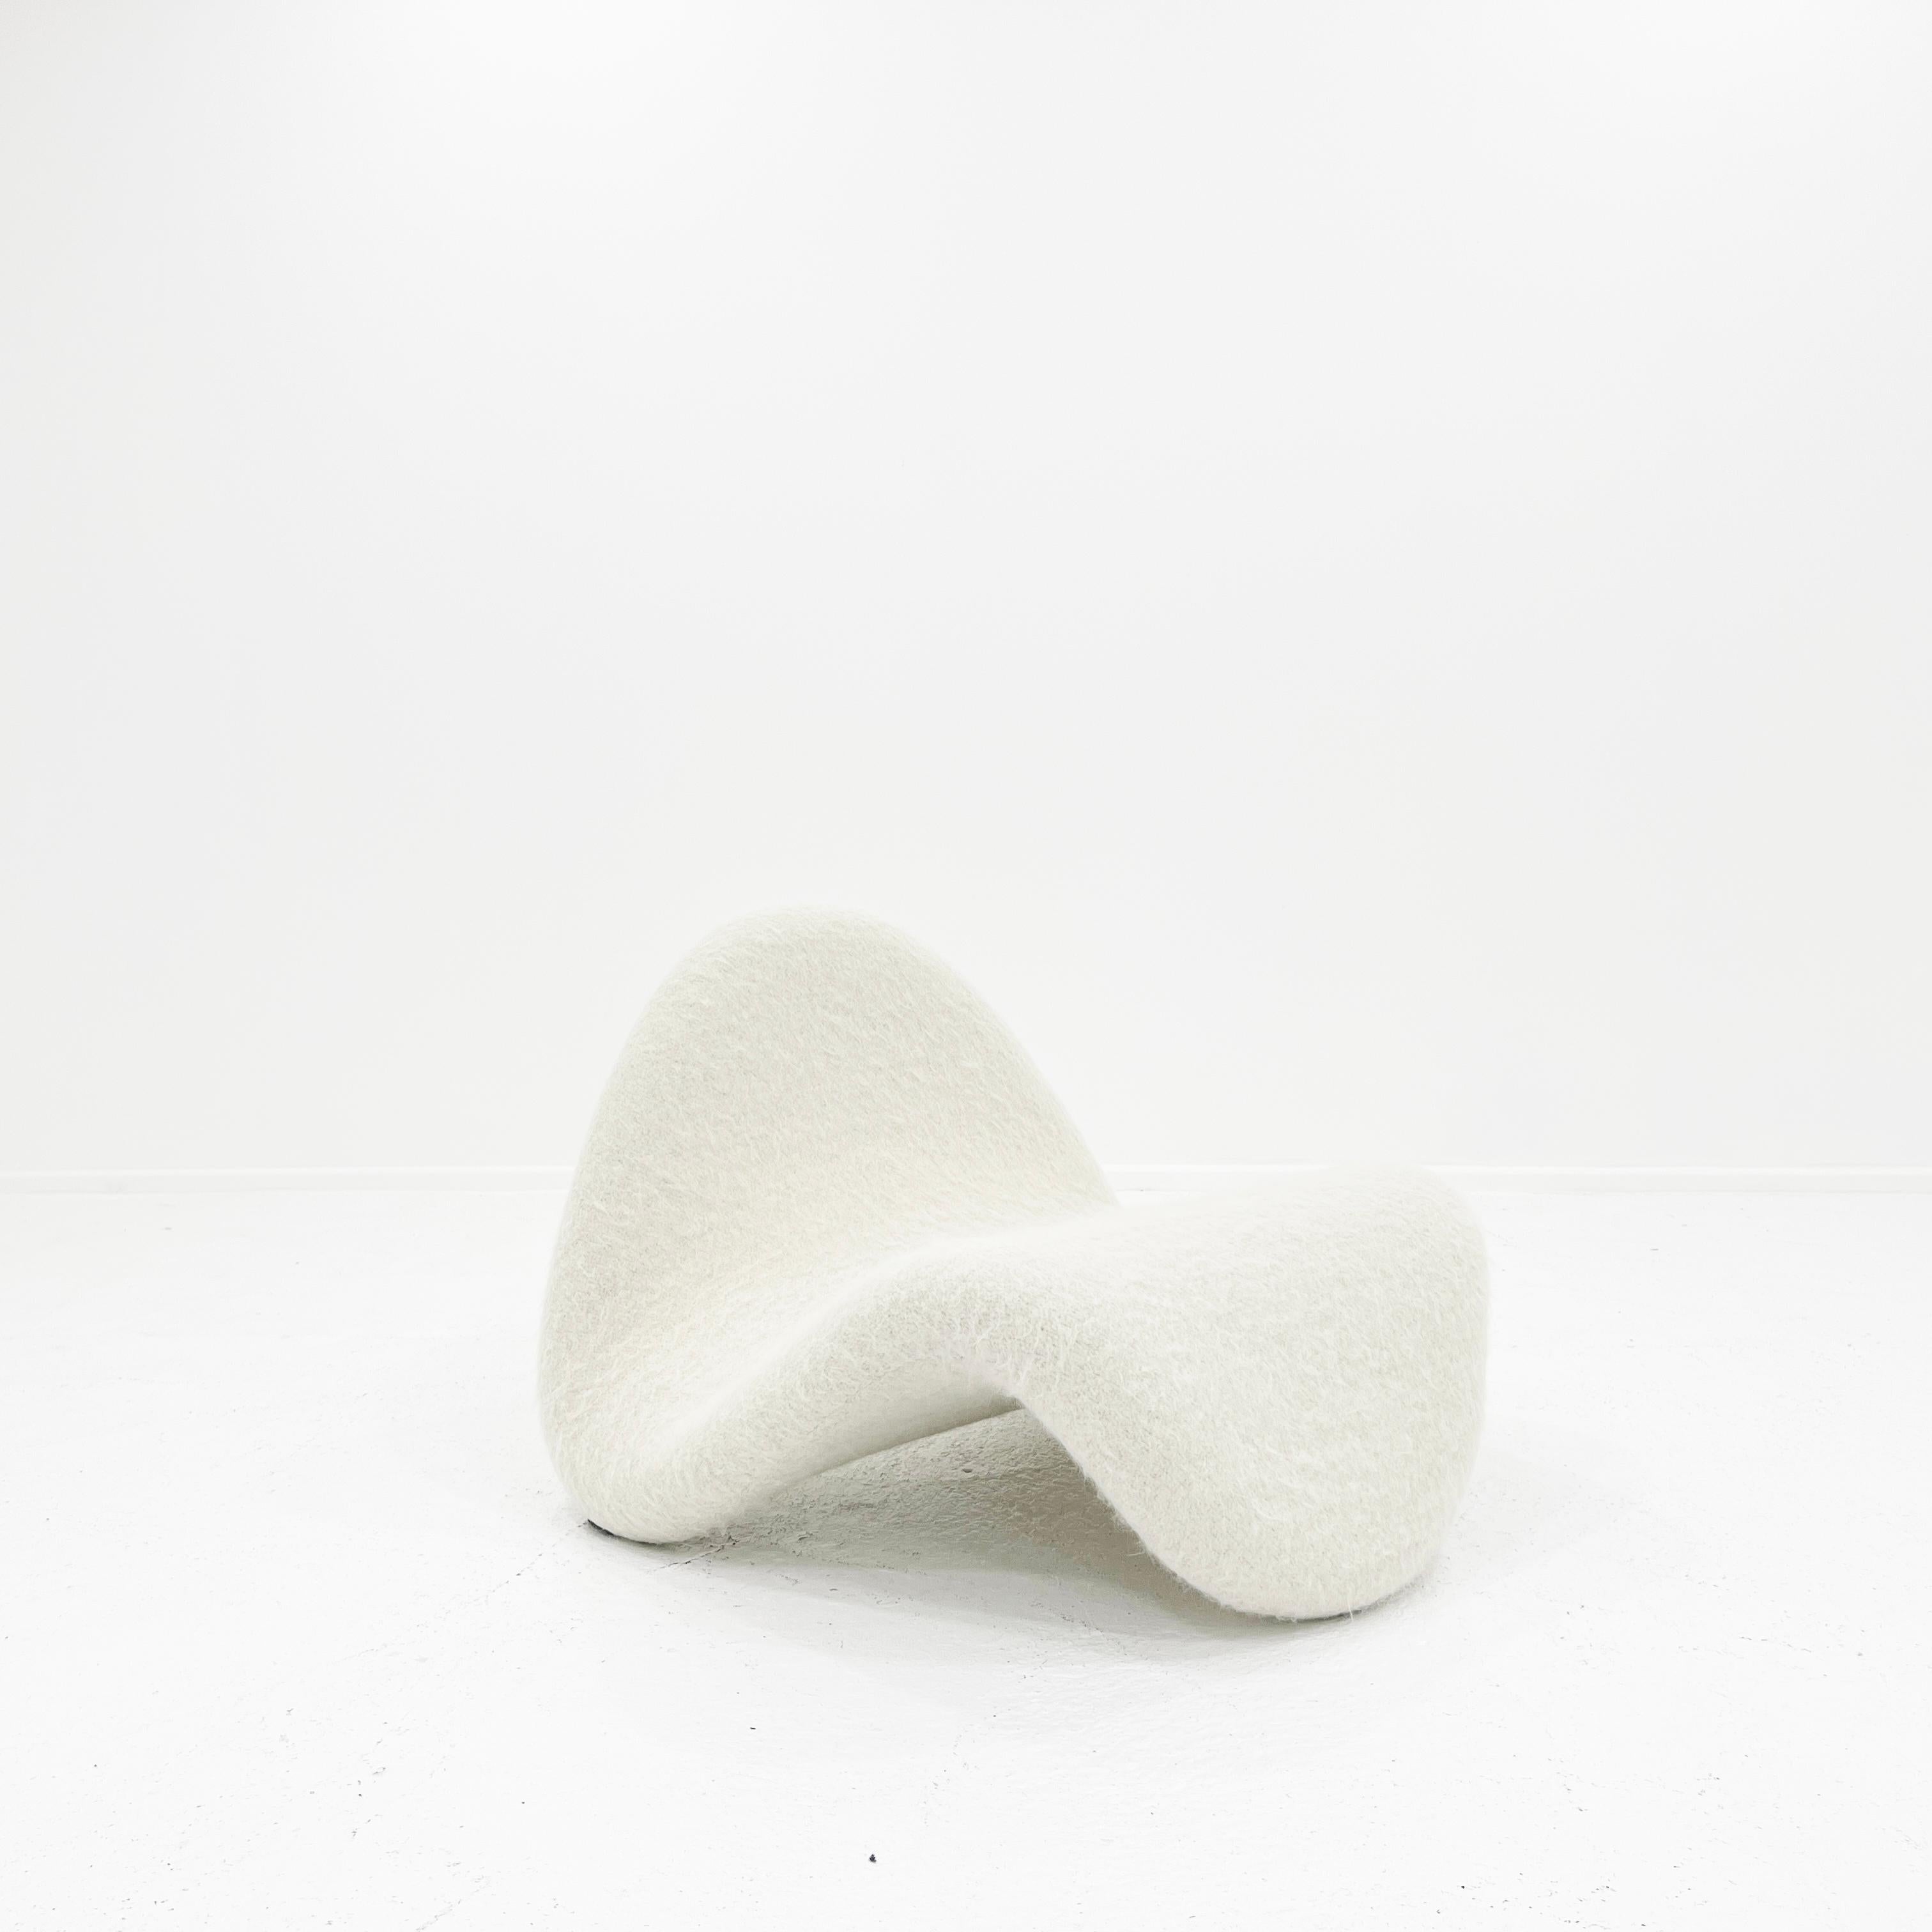 Tongue Lounge Chair by Pierre Paulin for Artifort, 1960s

A truly stunning mid century Pierre Paulin 'Tongue' Chair for Artifort, 1960s.

The piece has just been expertly restored with new foam and reupholstered in a Pierre Frey white Mohair and